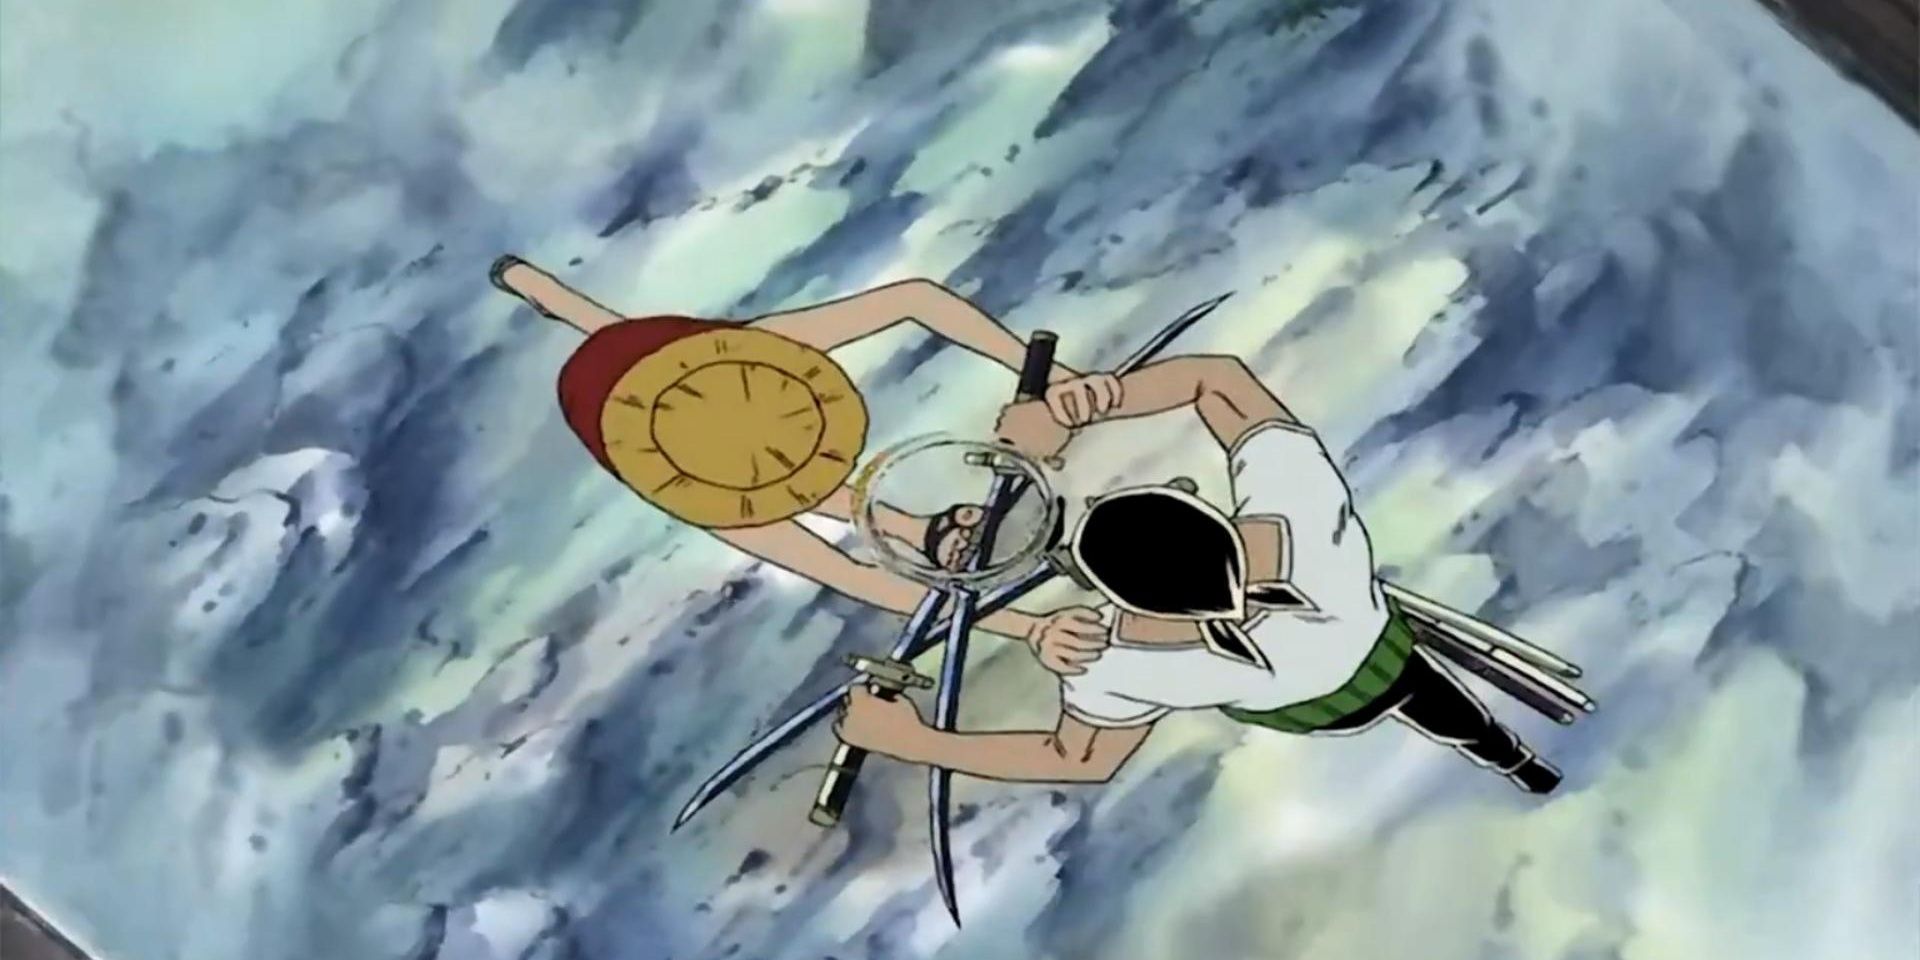 Luffy fighting Zoro at Whiskey Peak due to a simple misunderstanding in One Piece.